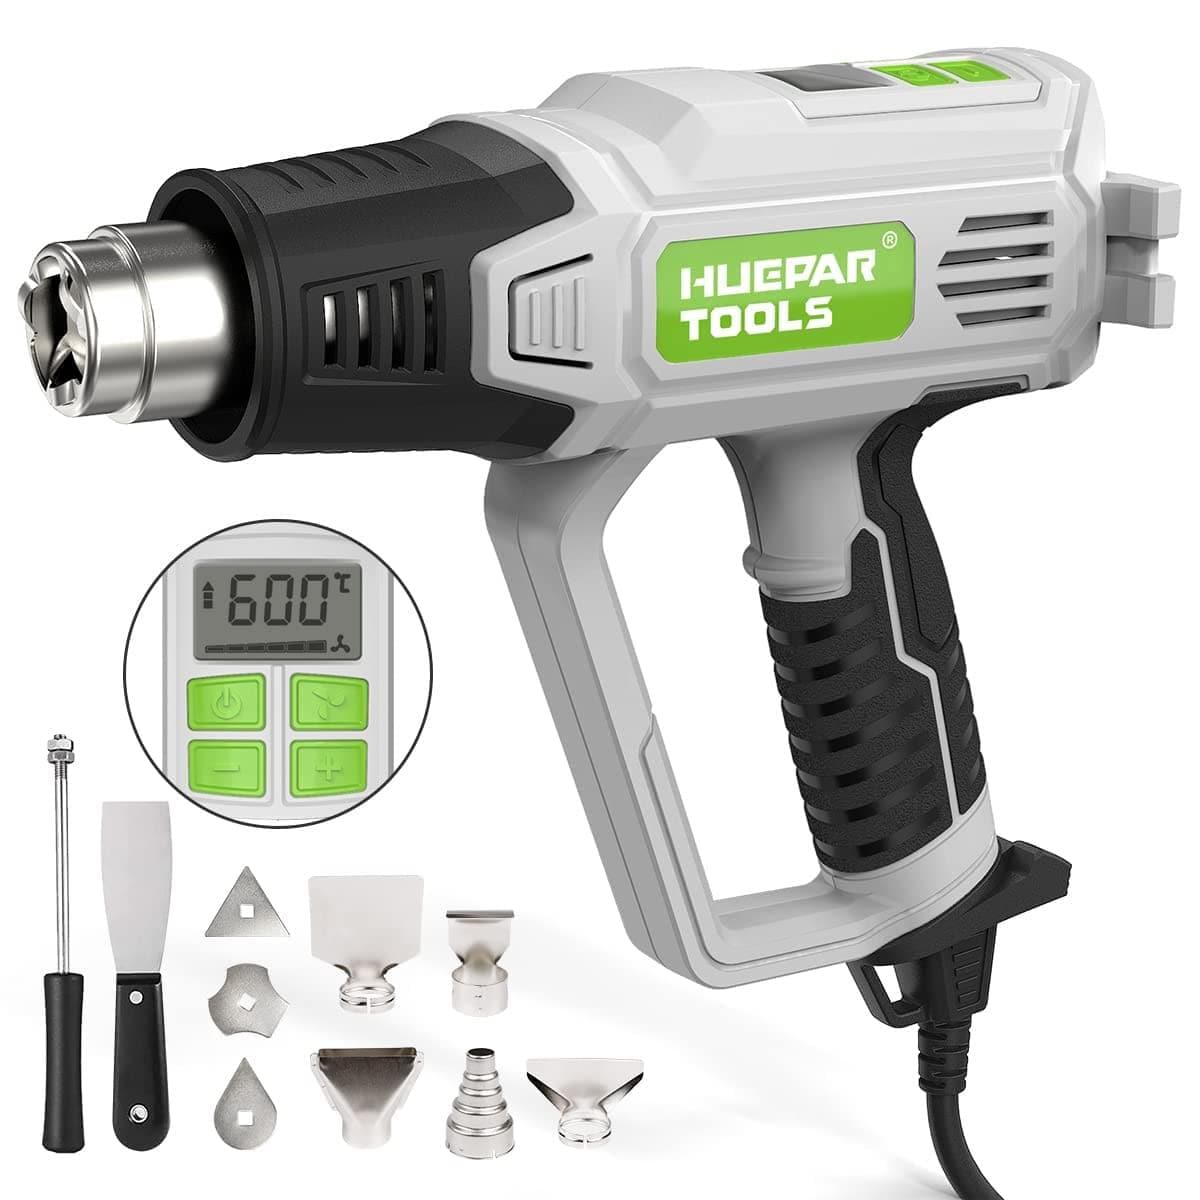 Huepar Tools SG800 HVLP Electric Paint Sprayer with 4 Metal Nozzles and 3 Patterns, 1300ml Capacity, for Interior and Exterior Walls, House Painting, Ceilings, Fences, Cabinets, and Chairs6